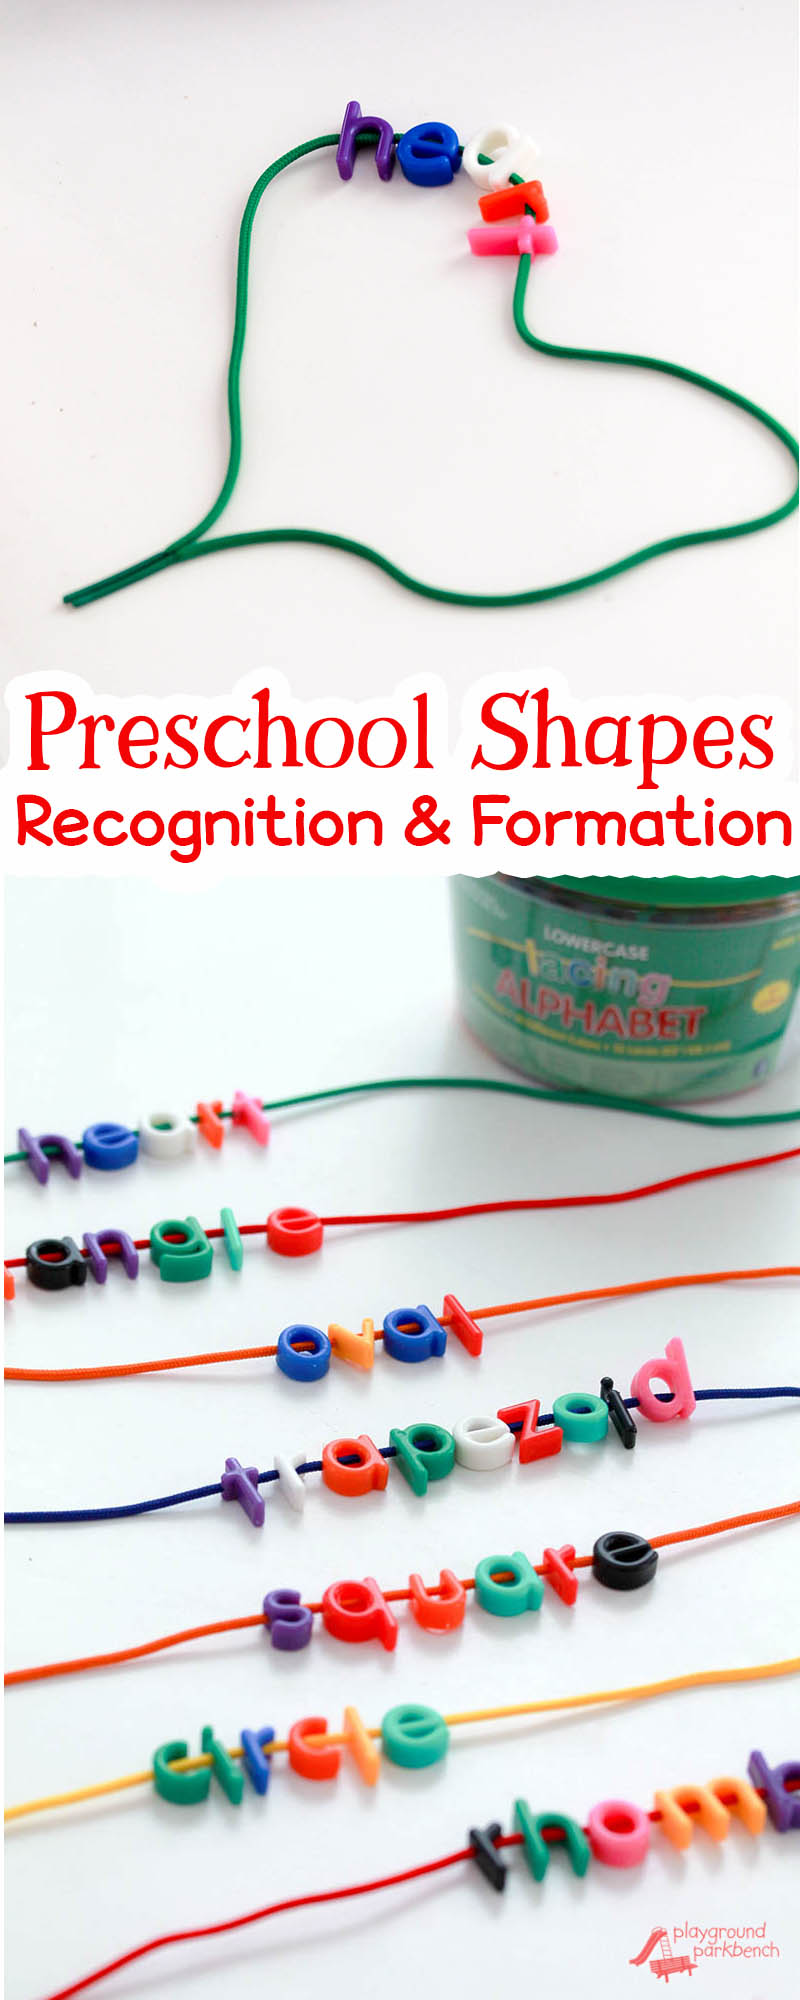 Teach your preschooler shapes with this simple, hands-on activity. Work on shape recognition, naming shapes, shape formation and even recognizing shape words in one simple activity. An easy math center set-up for preschool teachers or a fun hands-on learning through play activity for home. | STEM | STEAM | PreK | Preschool | Early Learning | Math for Kids | Kids Activities